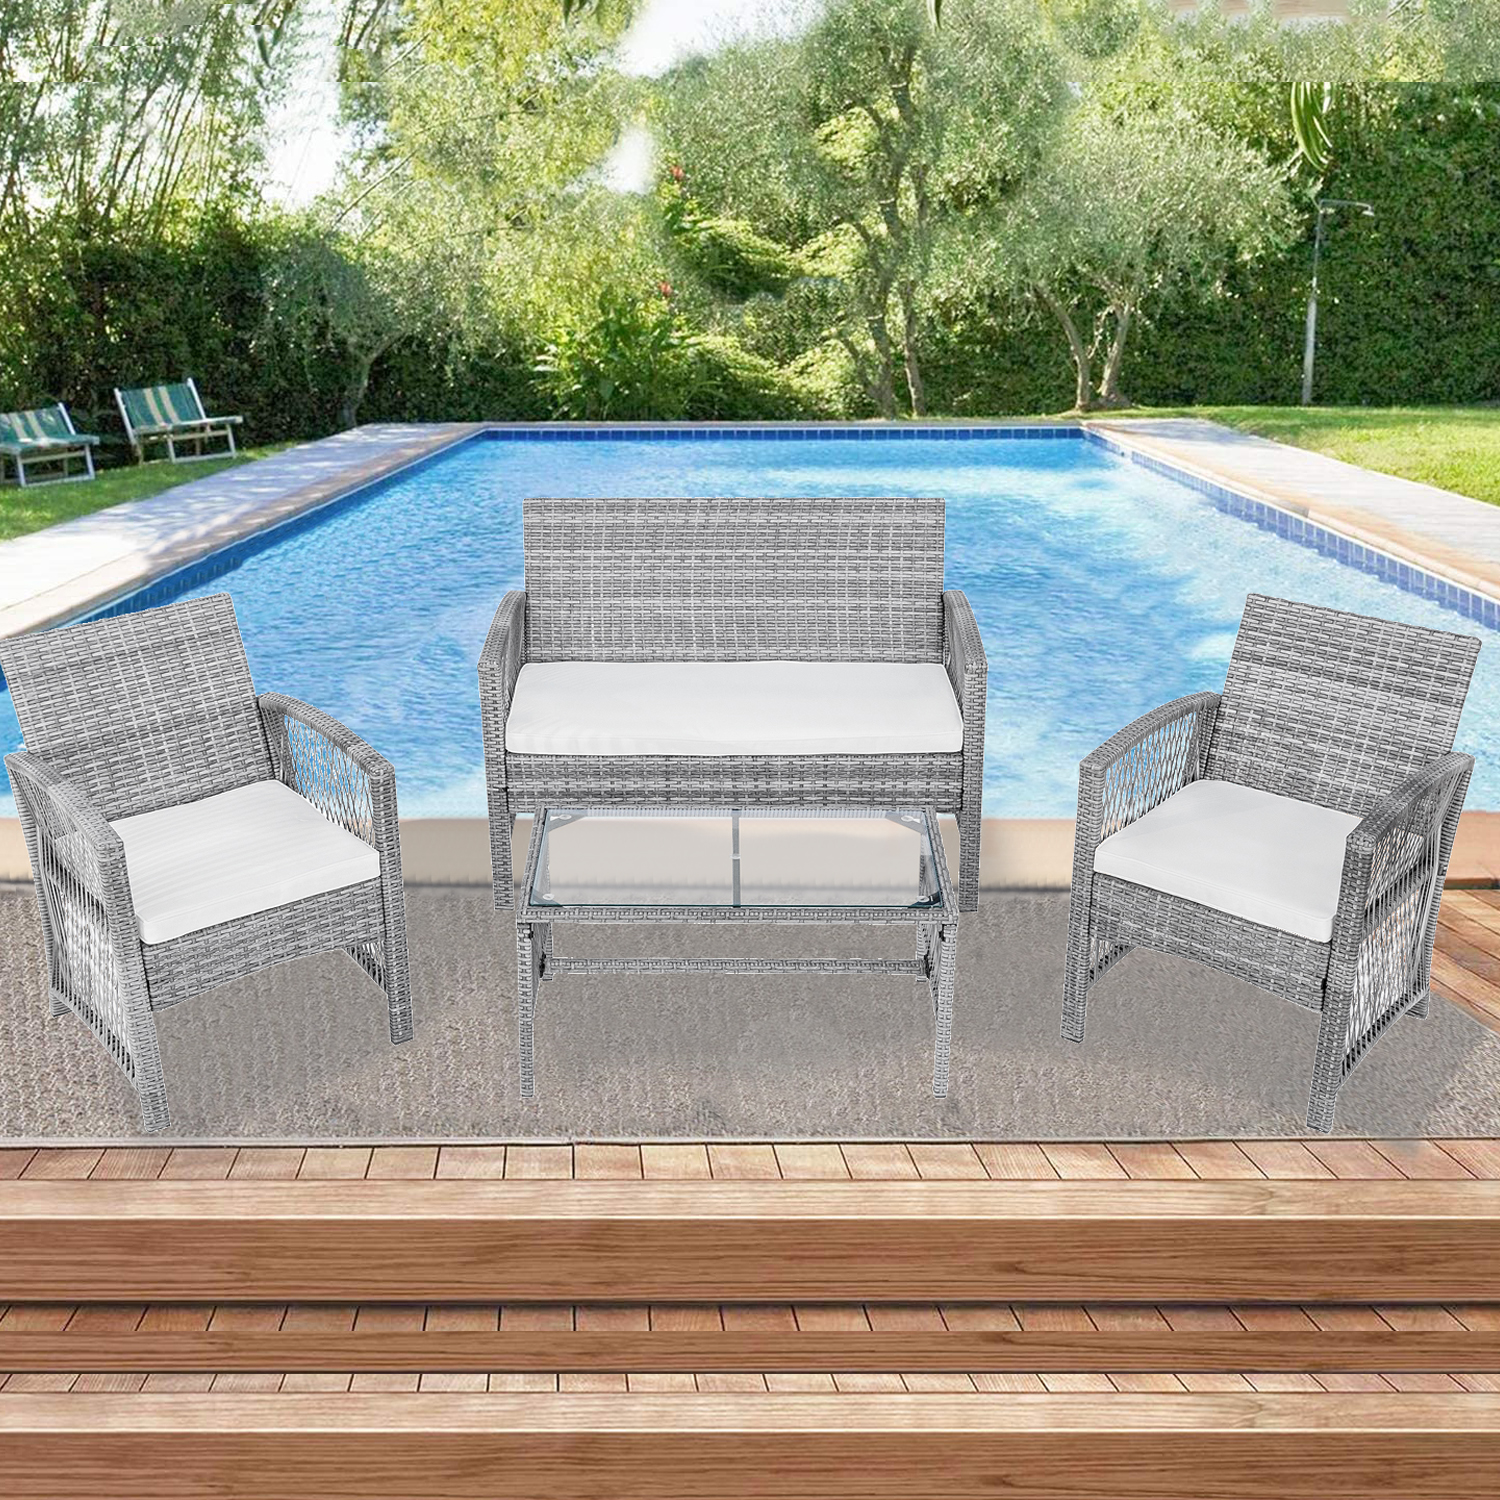 Patio Outdoor Furniture Sets, UHOMEPRO 4 Pieces PE Rattan Garden Furniture Wicker Chairs Set with Coffee Table, Outdoor Conversation Sets, Patio Dining Set for Backyard Poolside Porch, Gray, W7764 - image 1 of 11